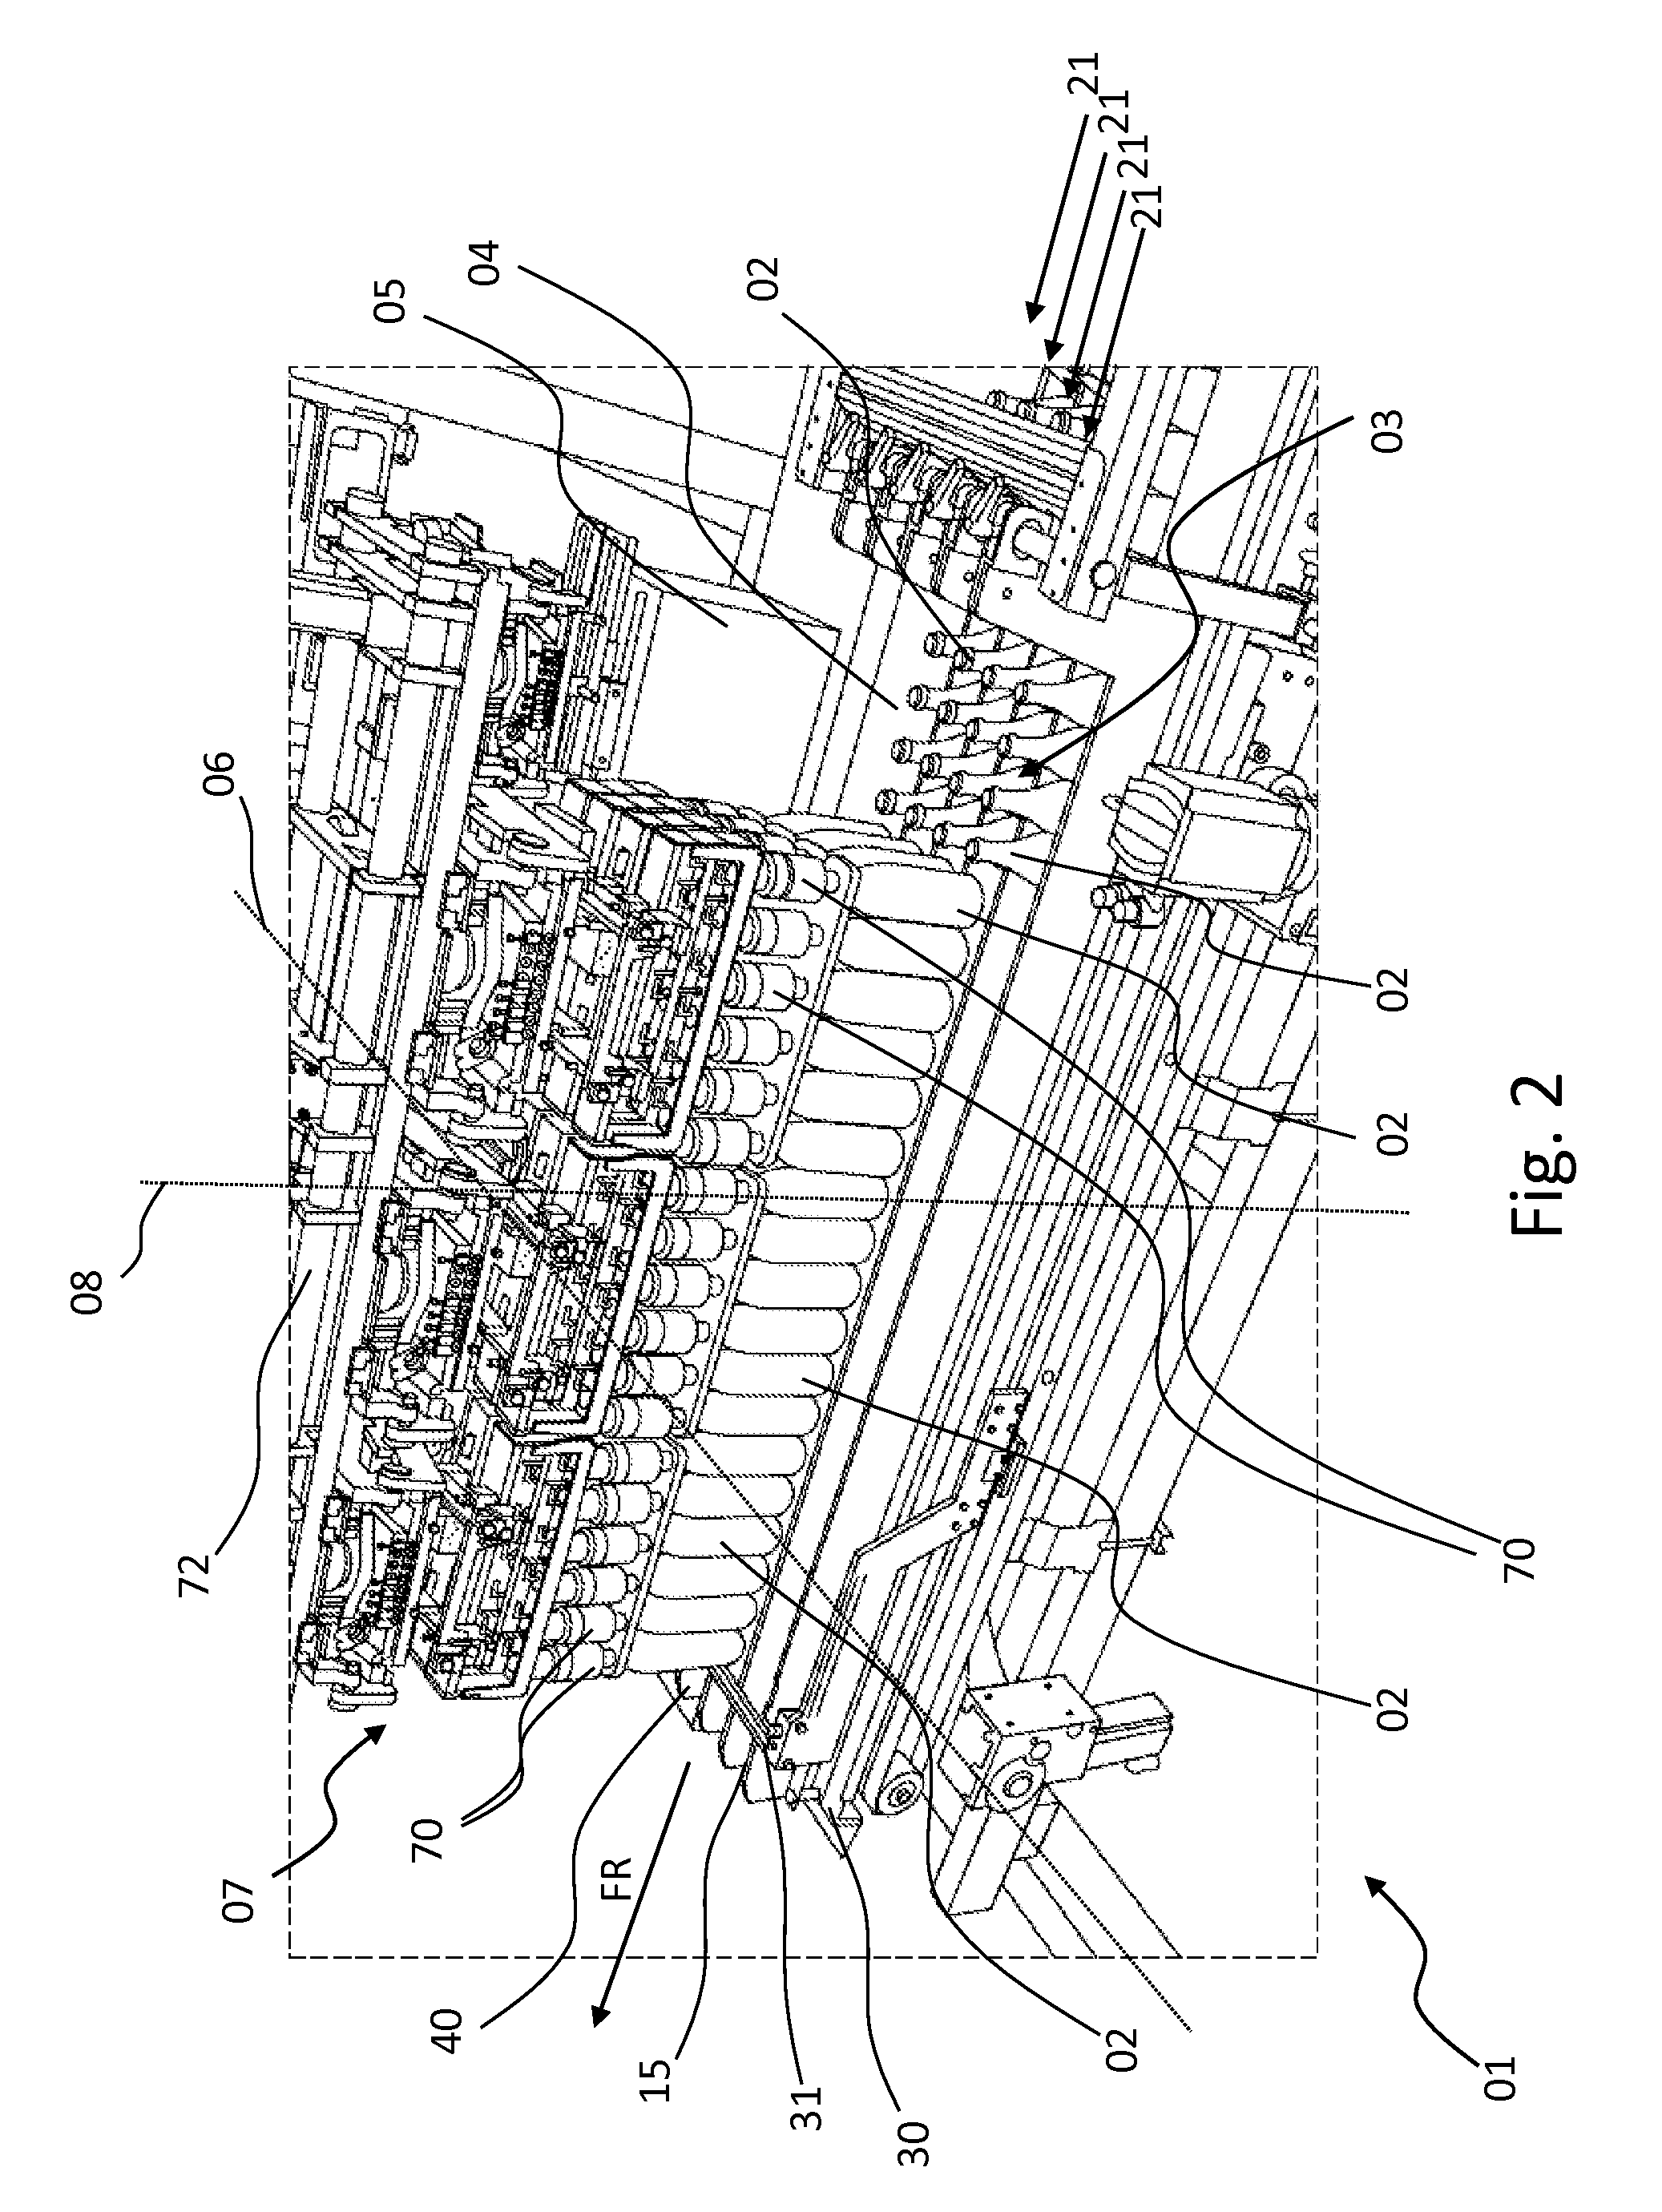 Apparatus and method for handling articles